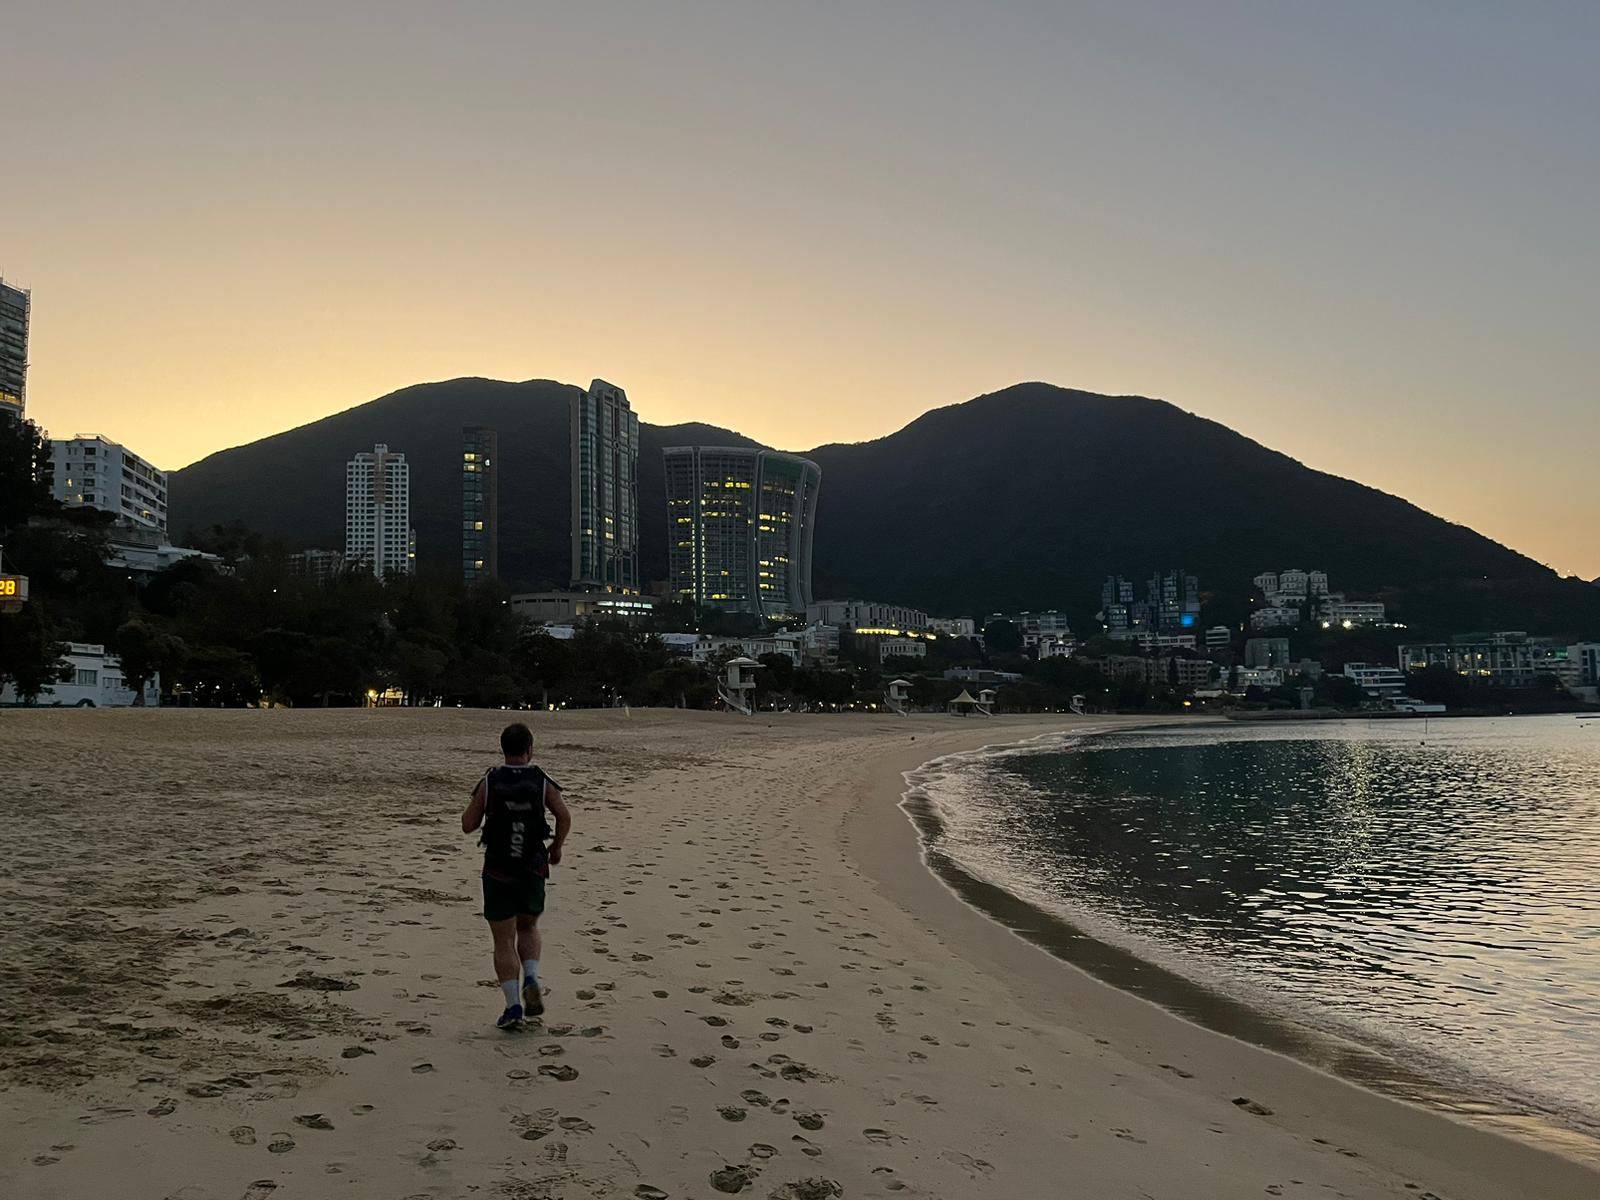 Duncan Swanson and George Darling have been doing laps of Repulse Bay to train for the Marathon des Sables. Photo: Handout